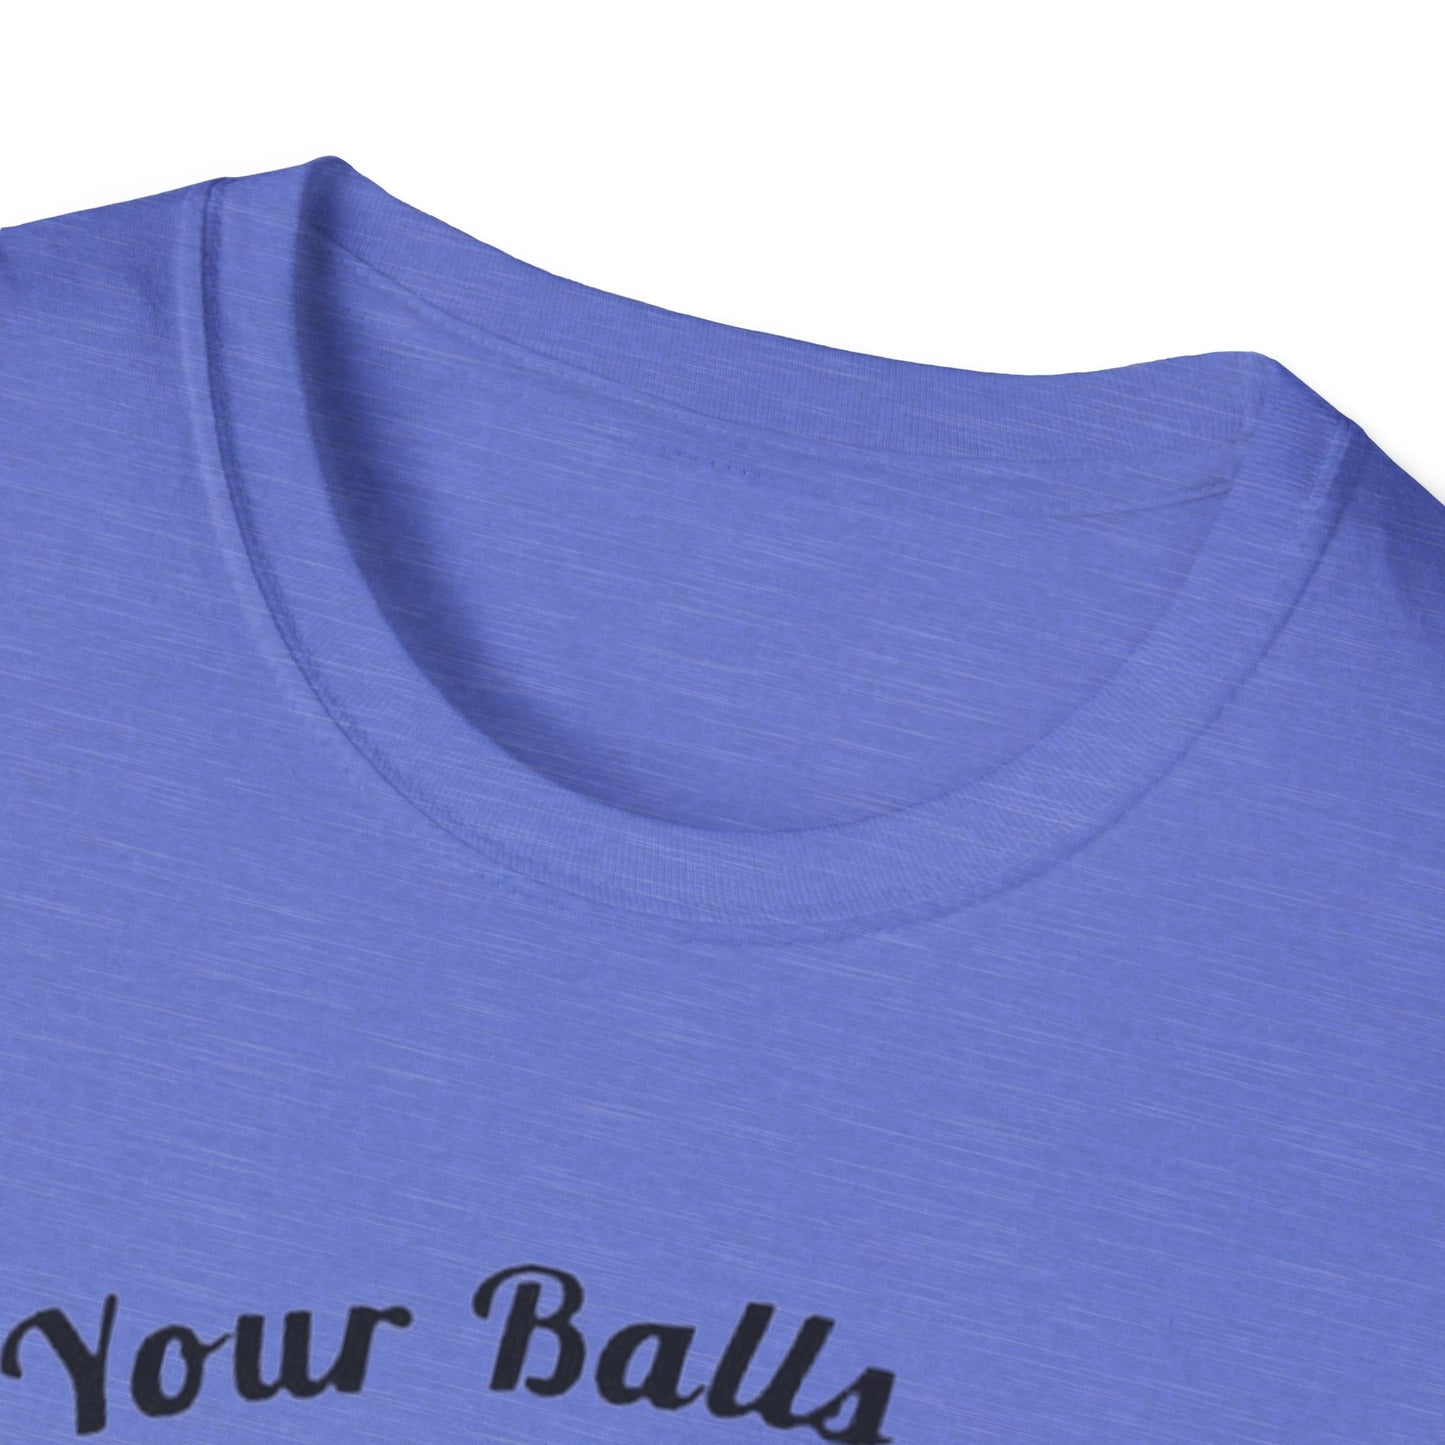 Copy of Grab your Balls Its canning Season - Unisex Softstyle T-Shirt